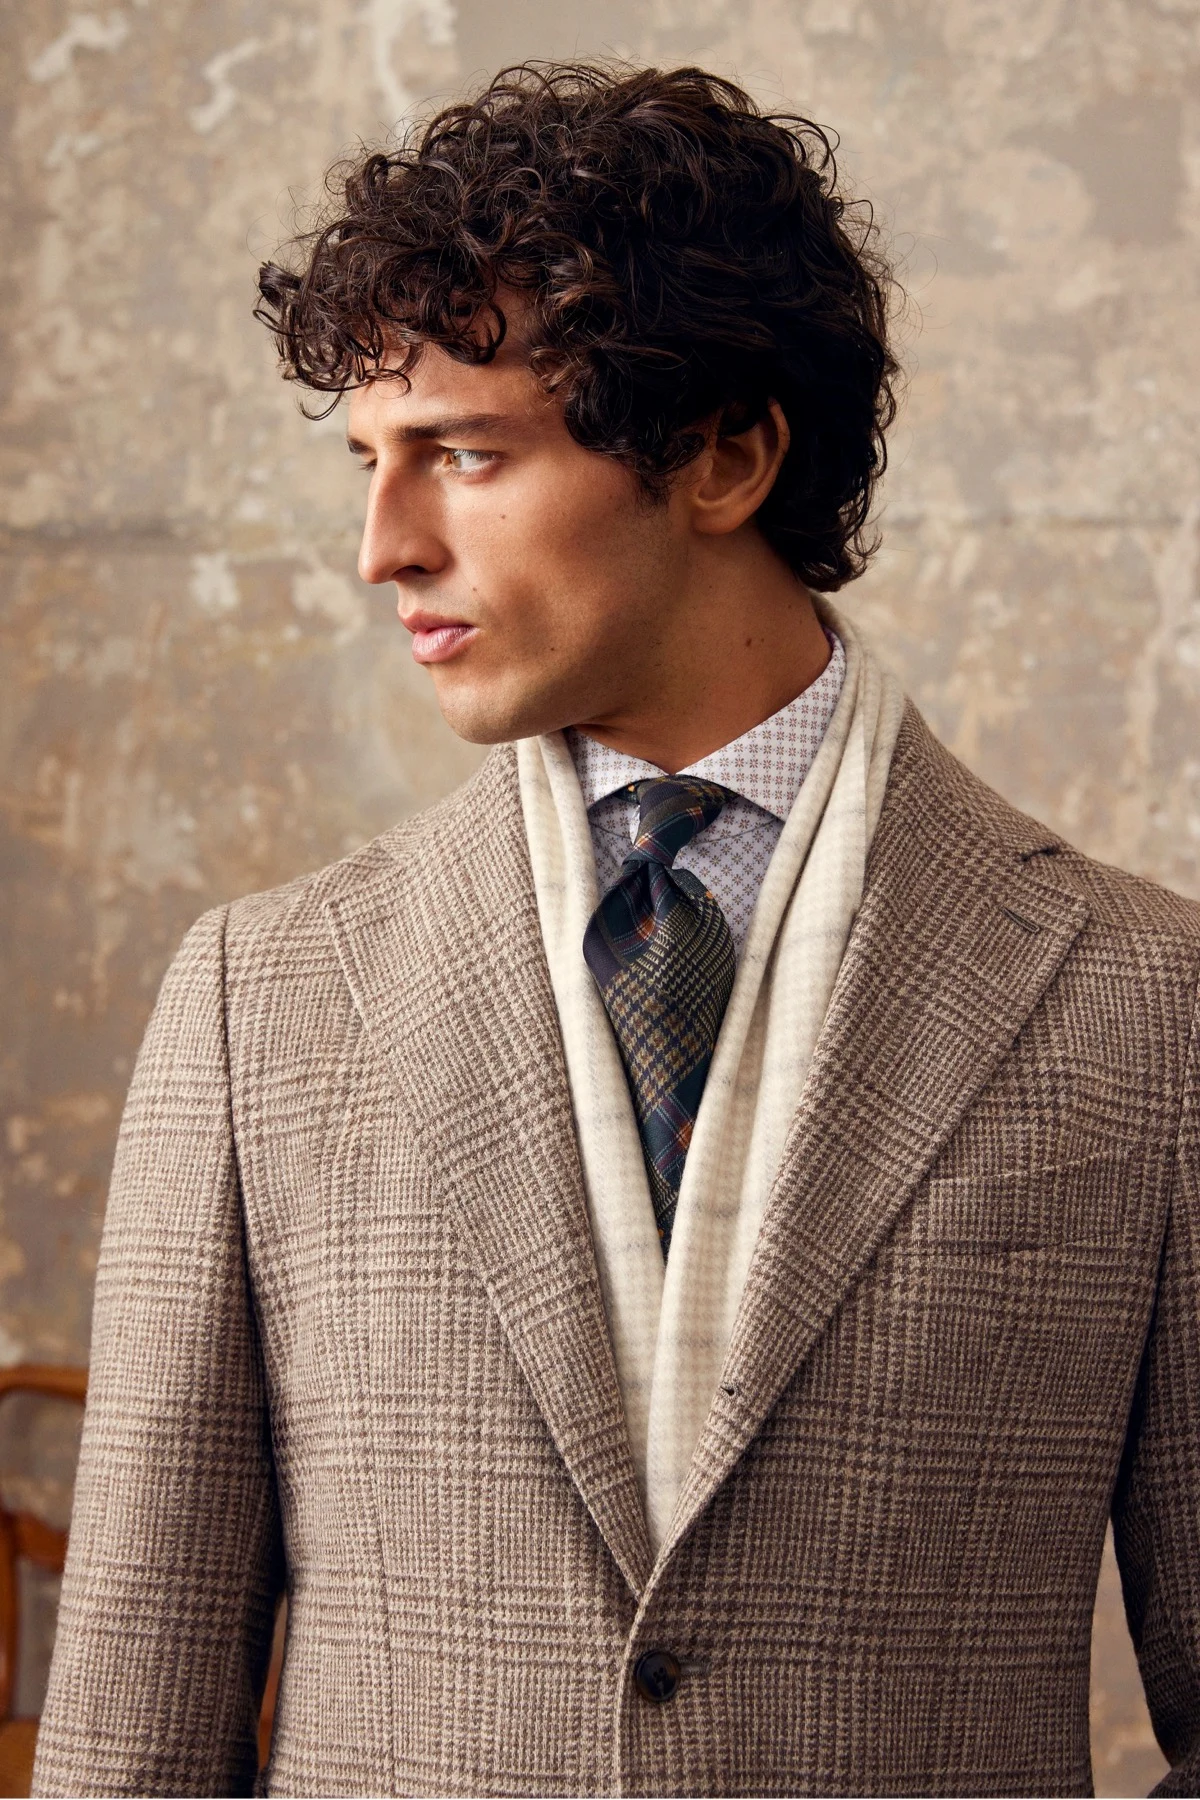 model styled with tie and warm scarf